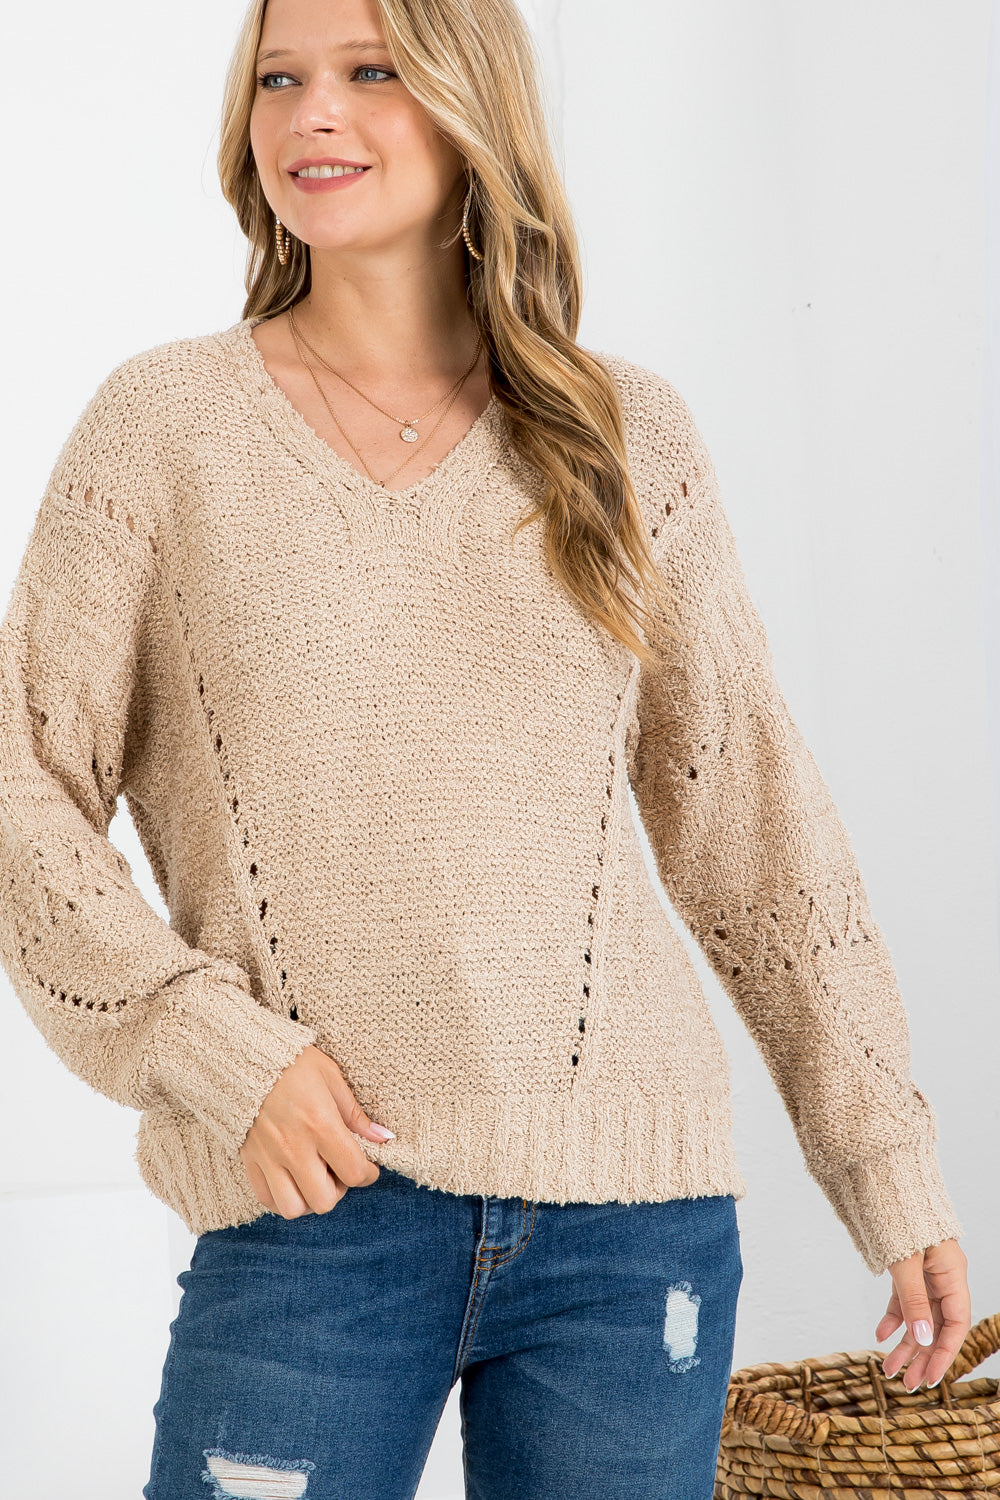 V-Neck Long Sleeve Sweater Top